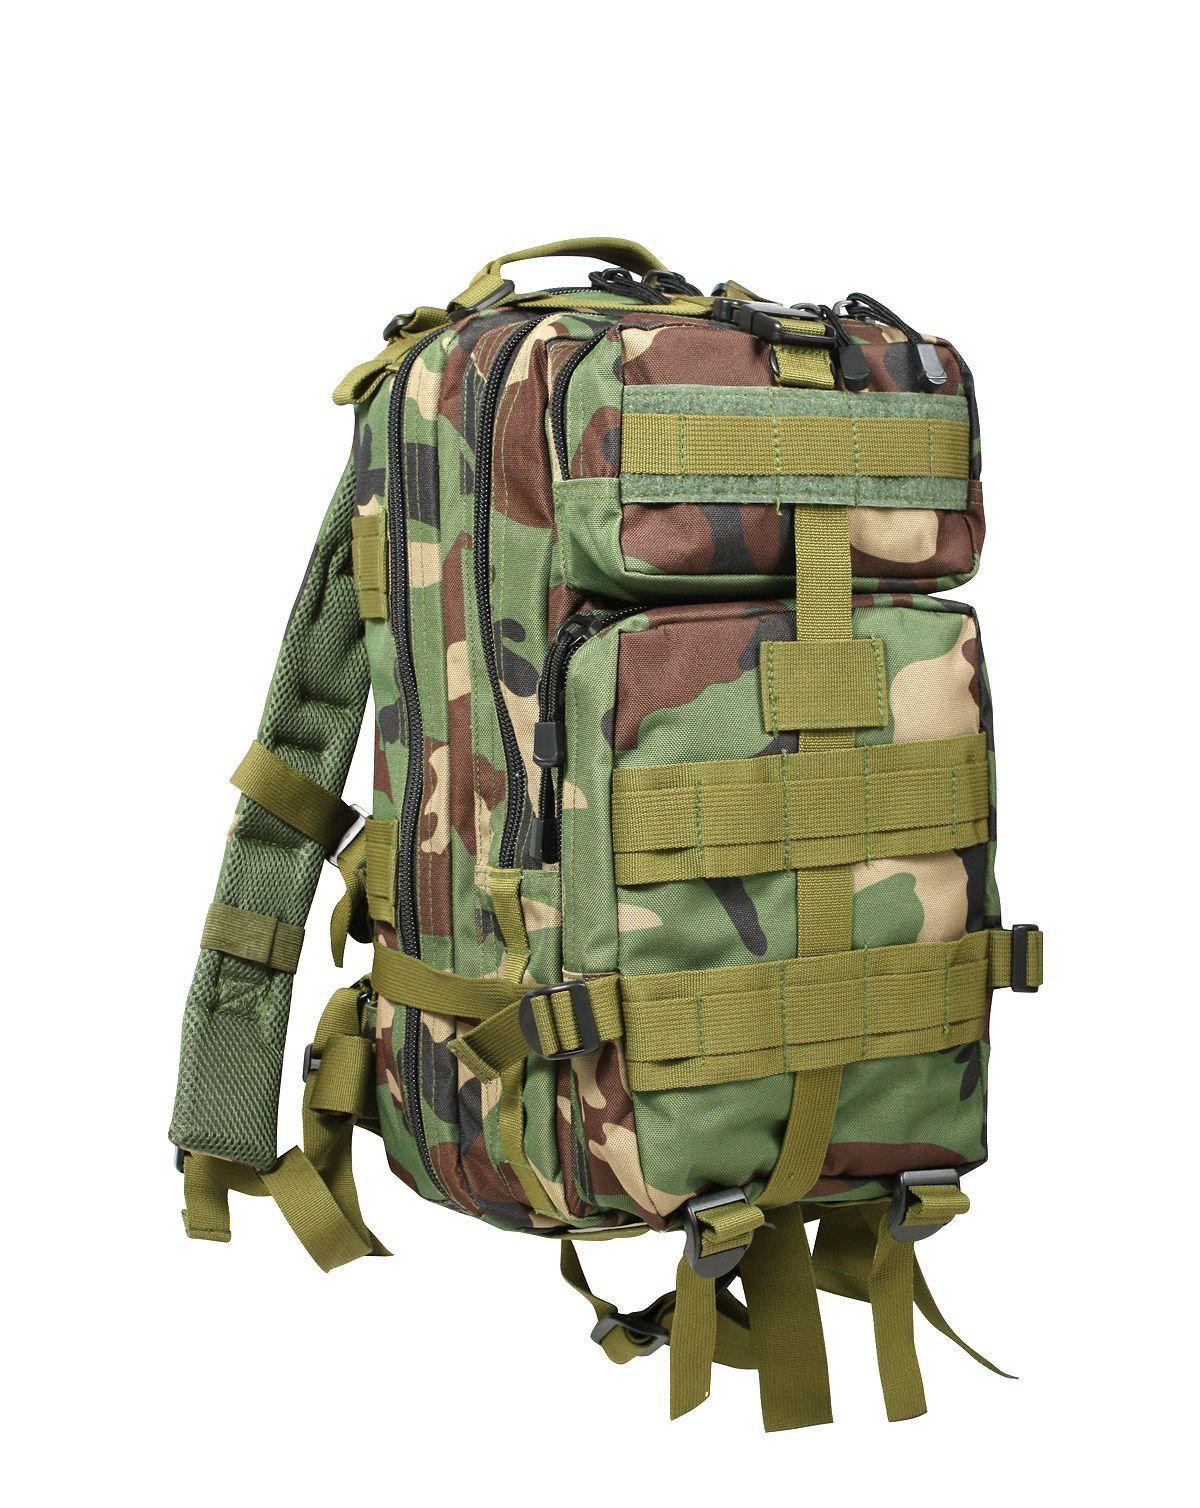 4: Rothco Transport Rygsæk m. MOLLE - 25 liter (Woodland, One Size)